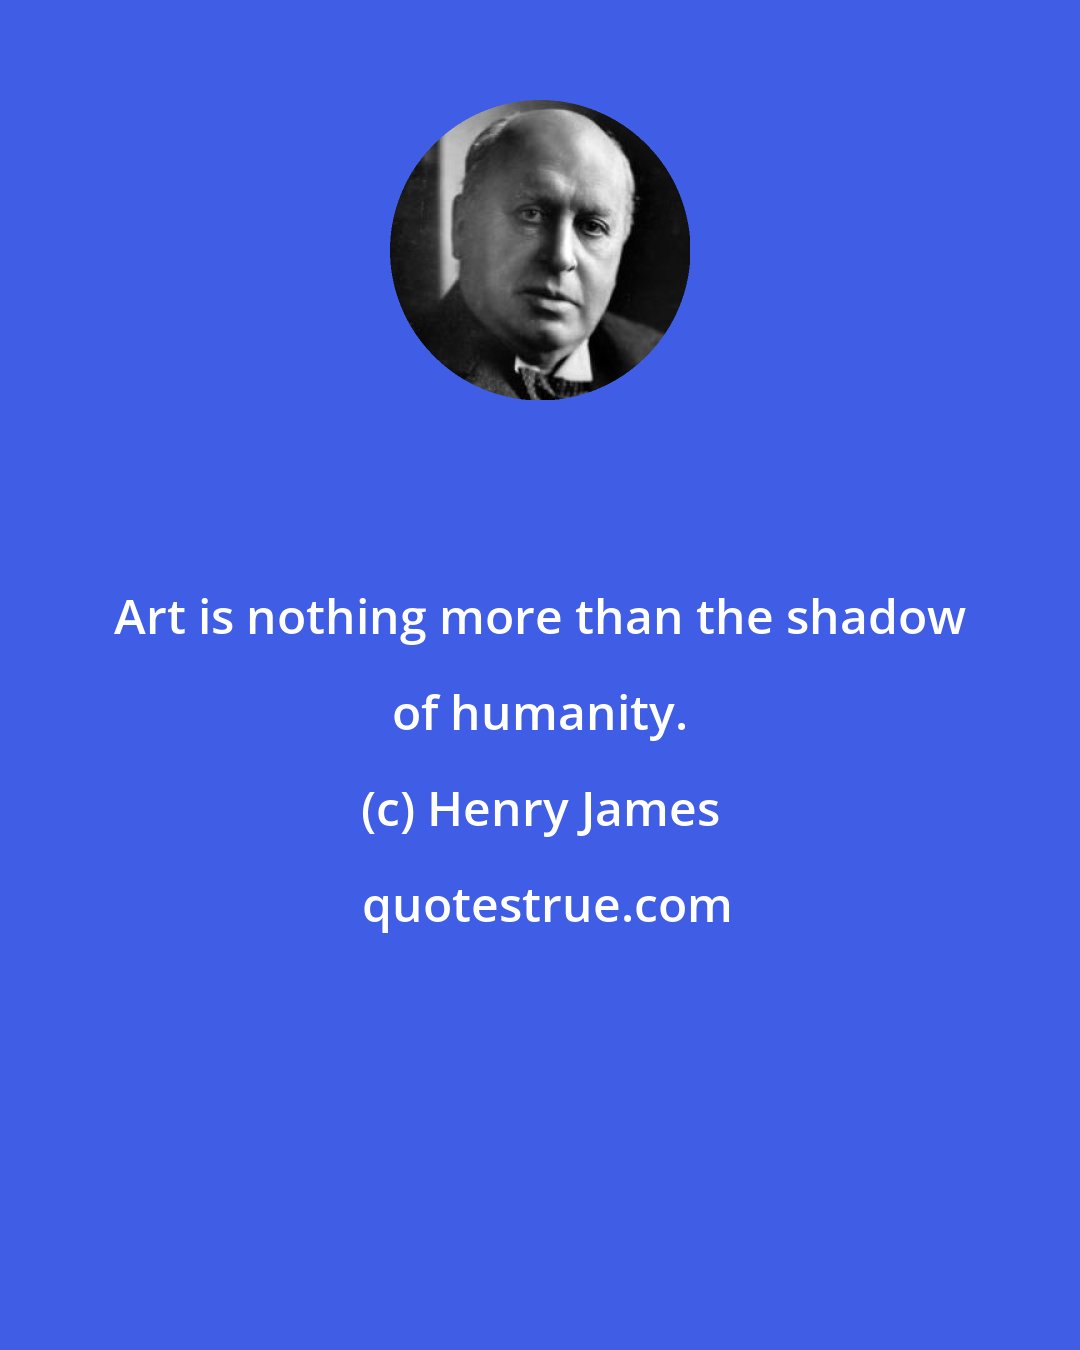 Henry James: Art is nothing more than the shadow of humanity.